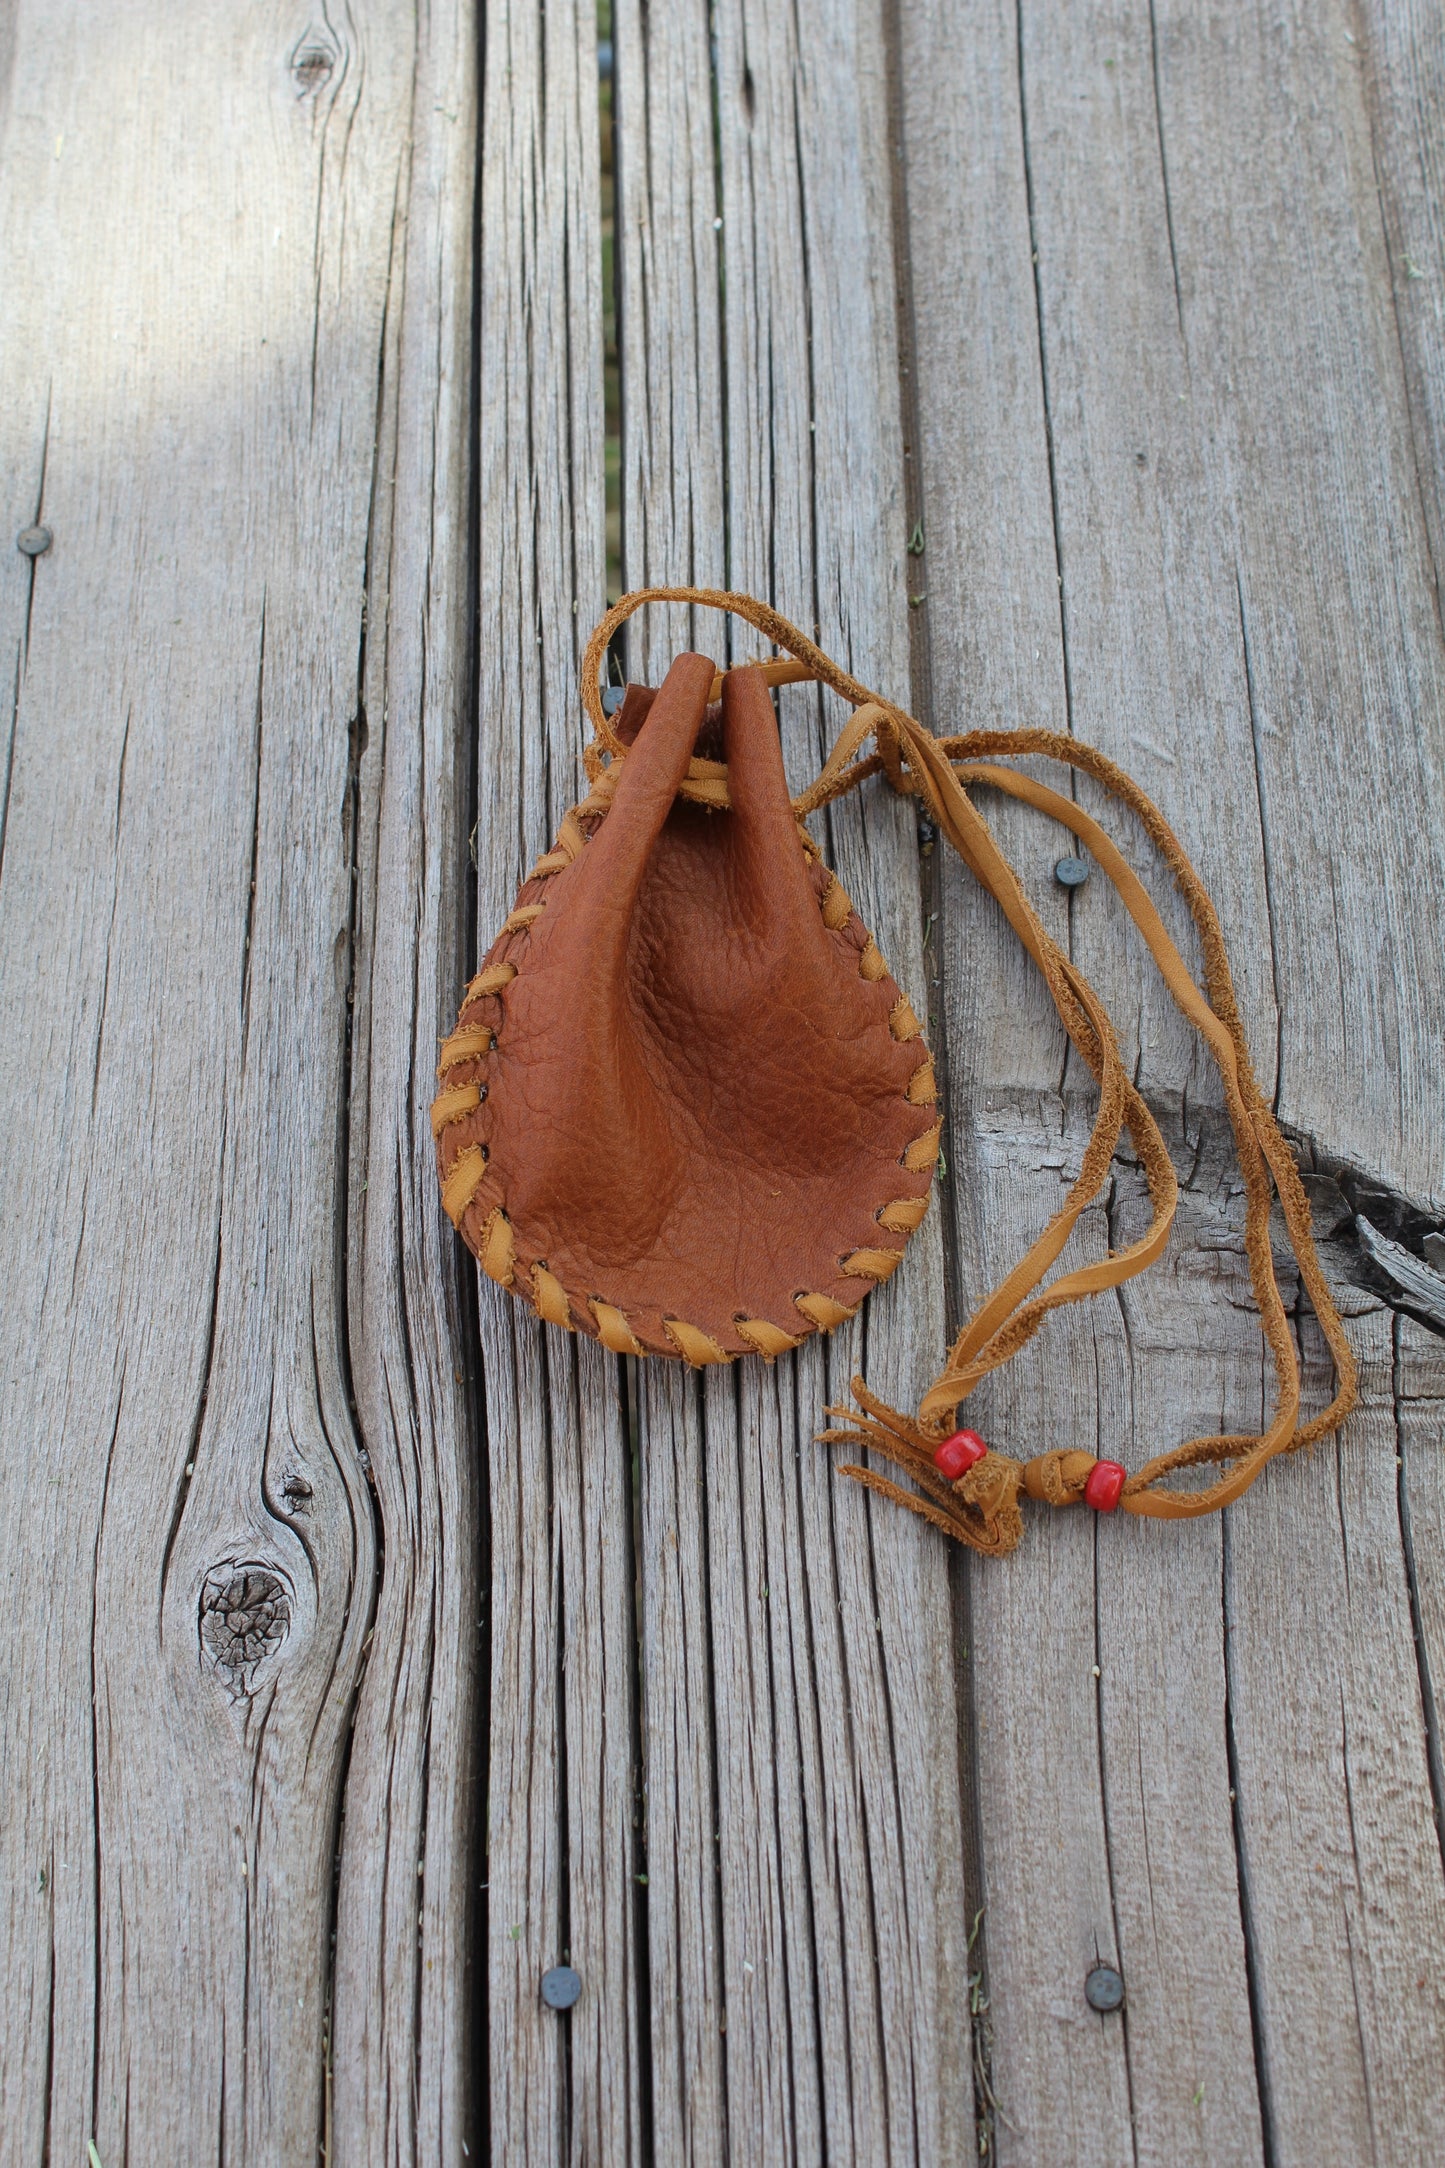 Large drawstring pouch, rustic leather bag